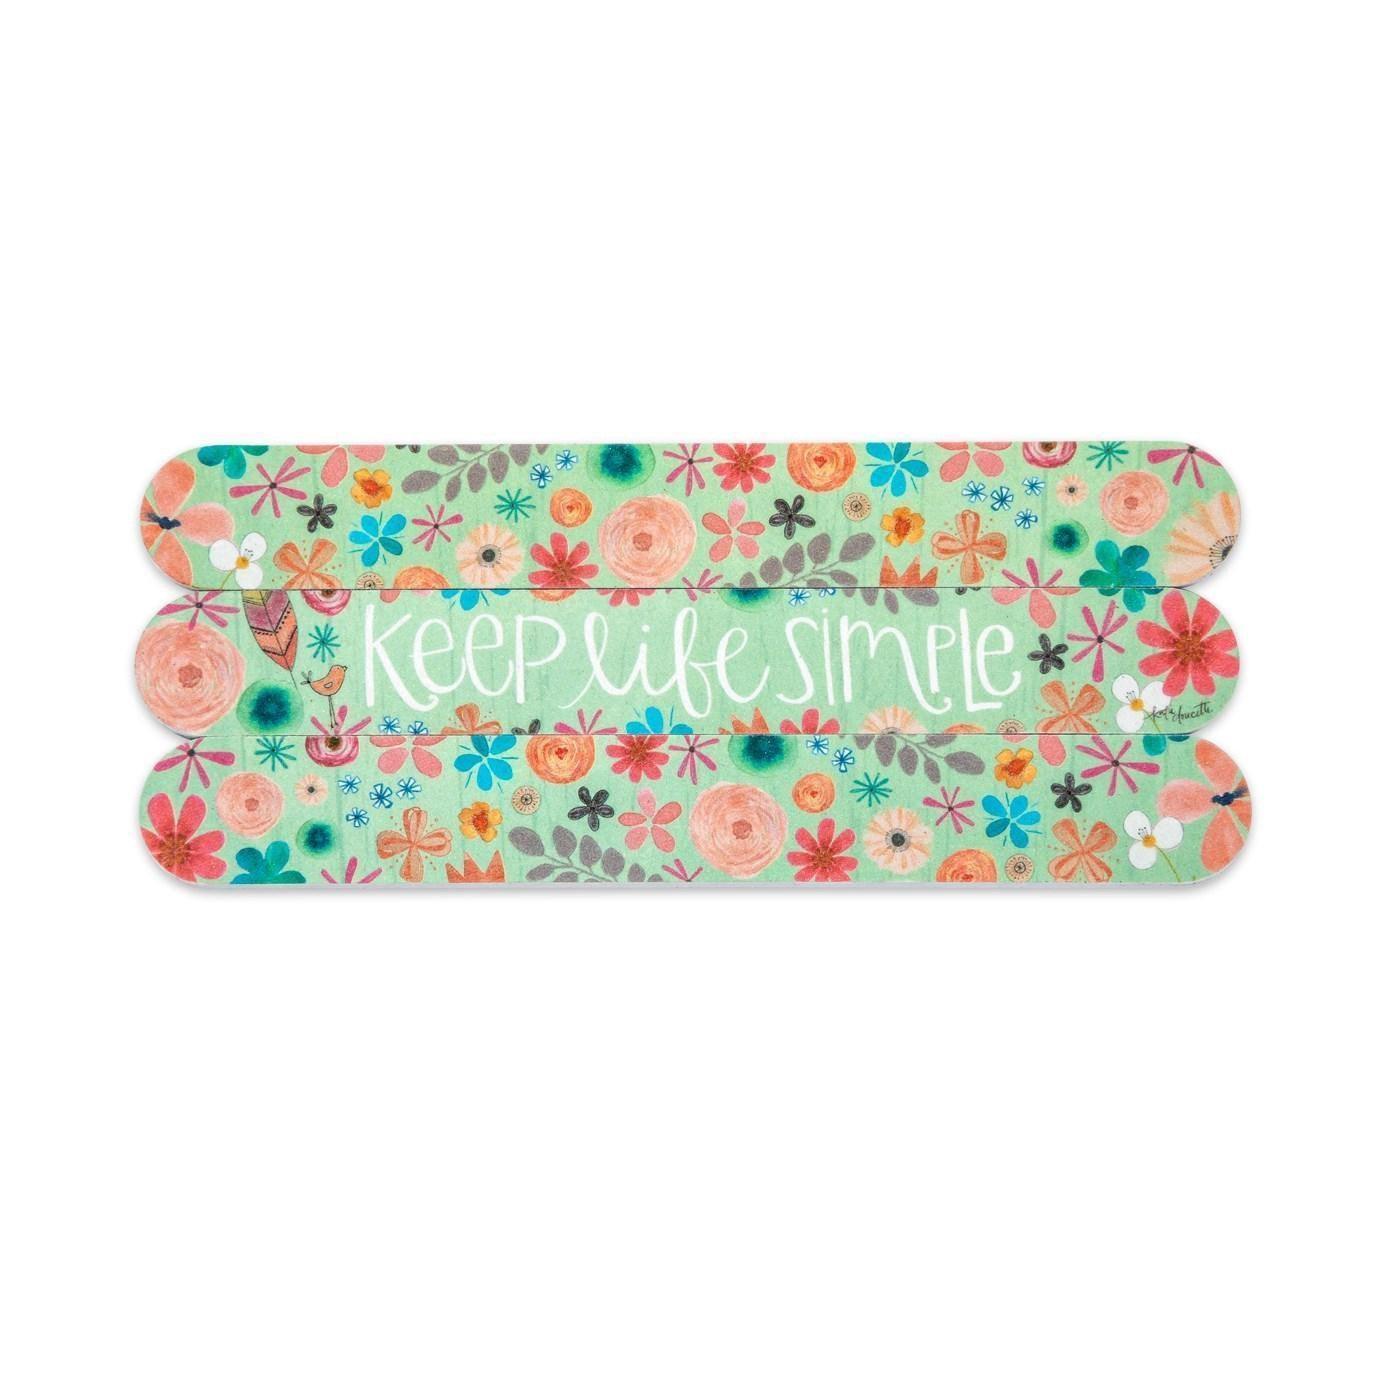 Keep Life Simple Emery Board - Sunshine and Grace Gifts